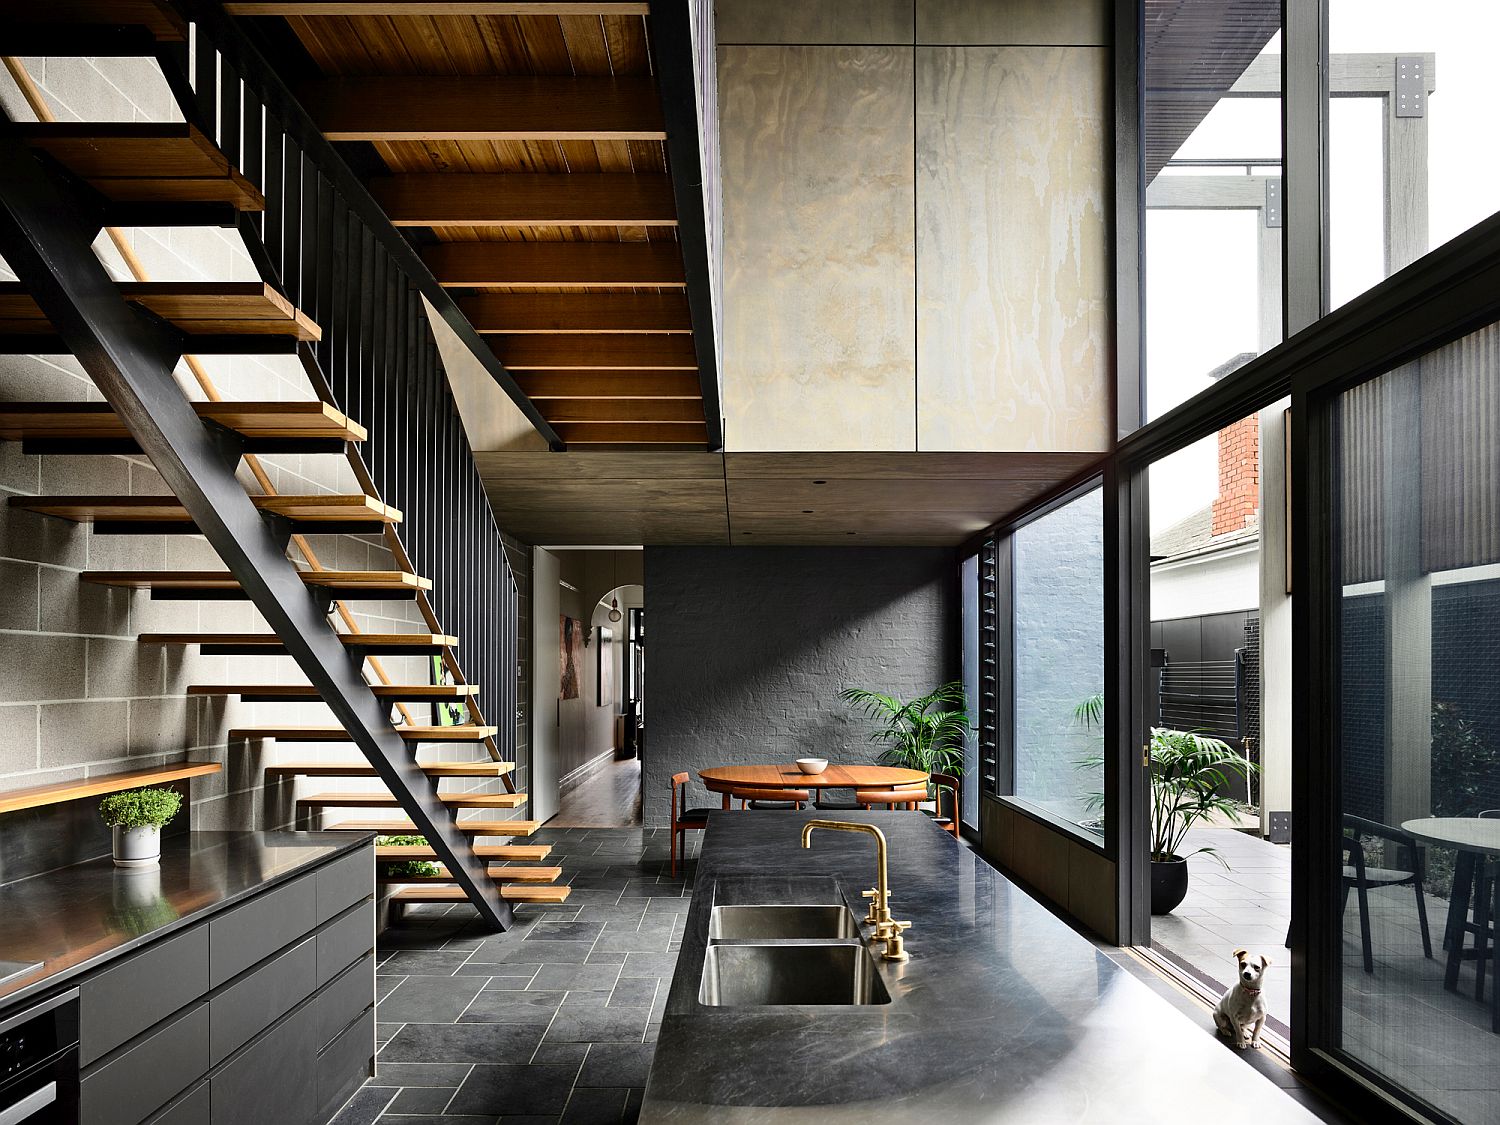 Polished-and-industrial-kitchen-in-black-is-a-showstopper